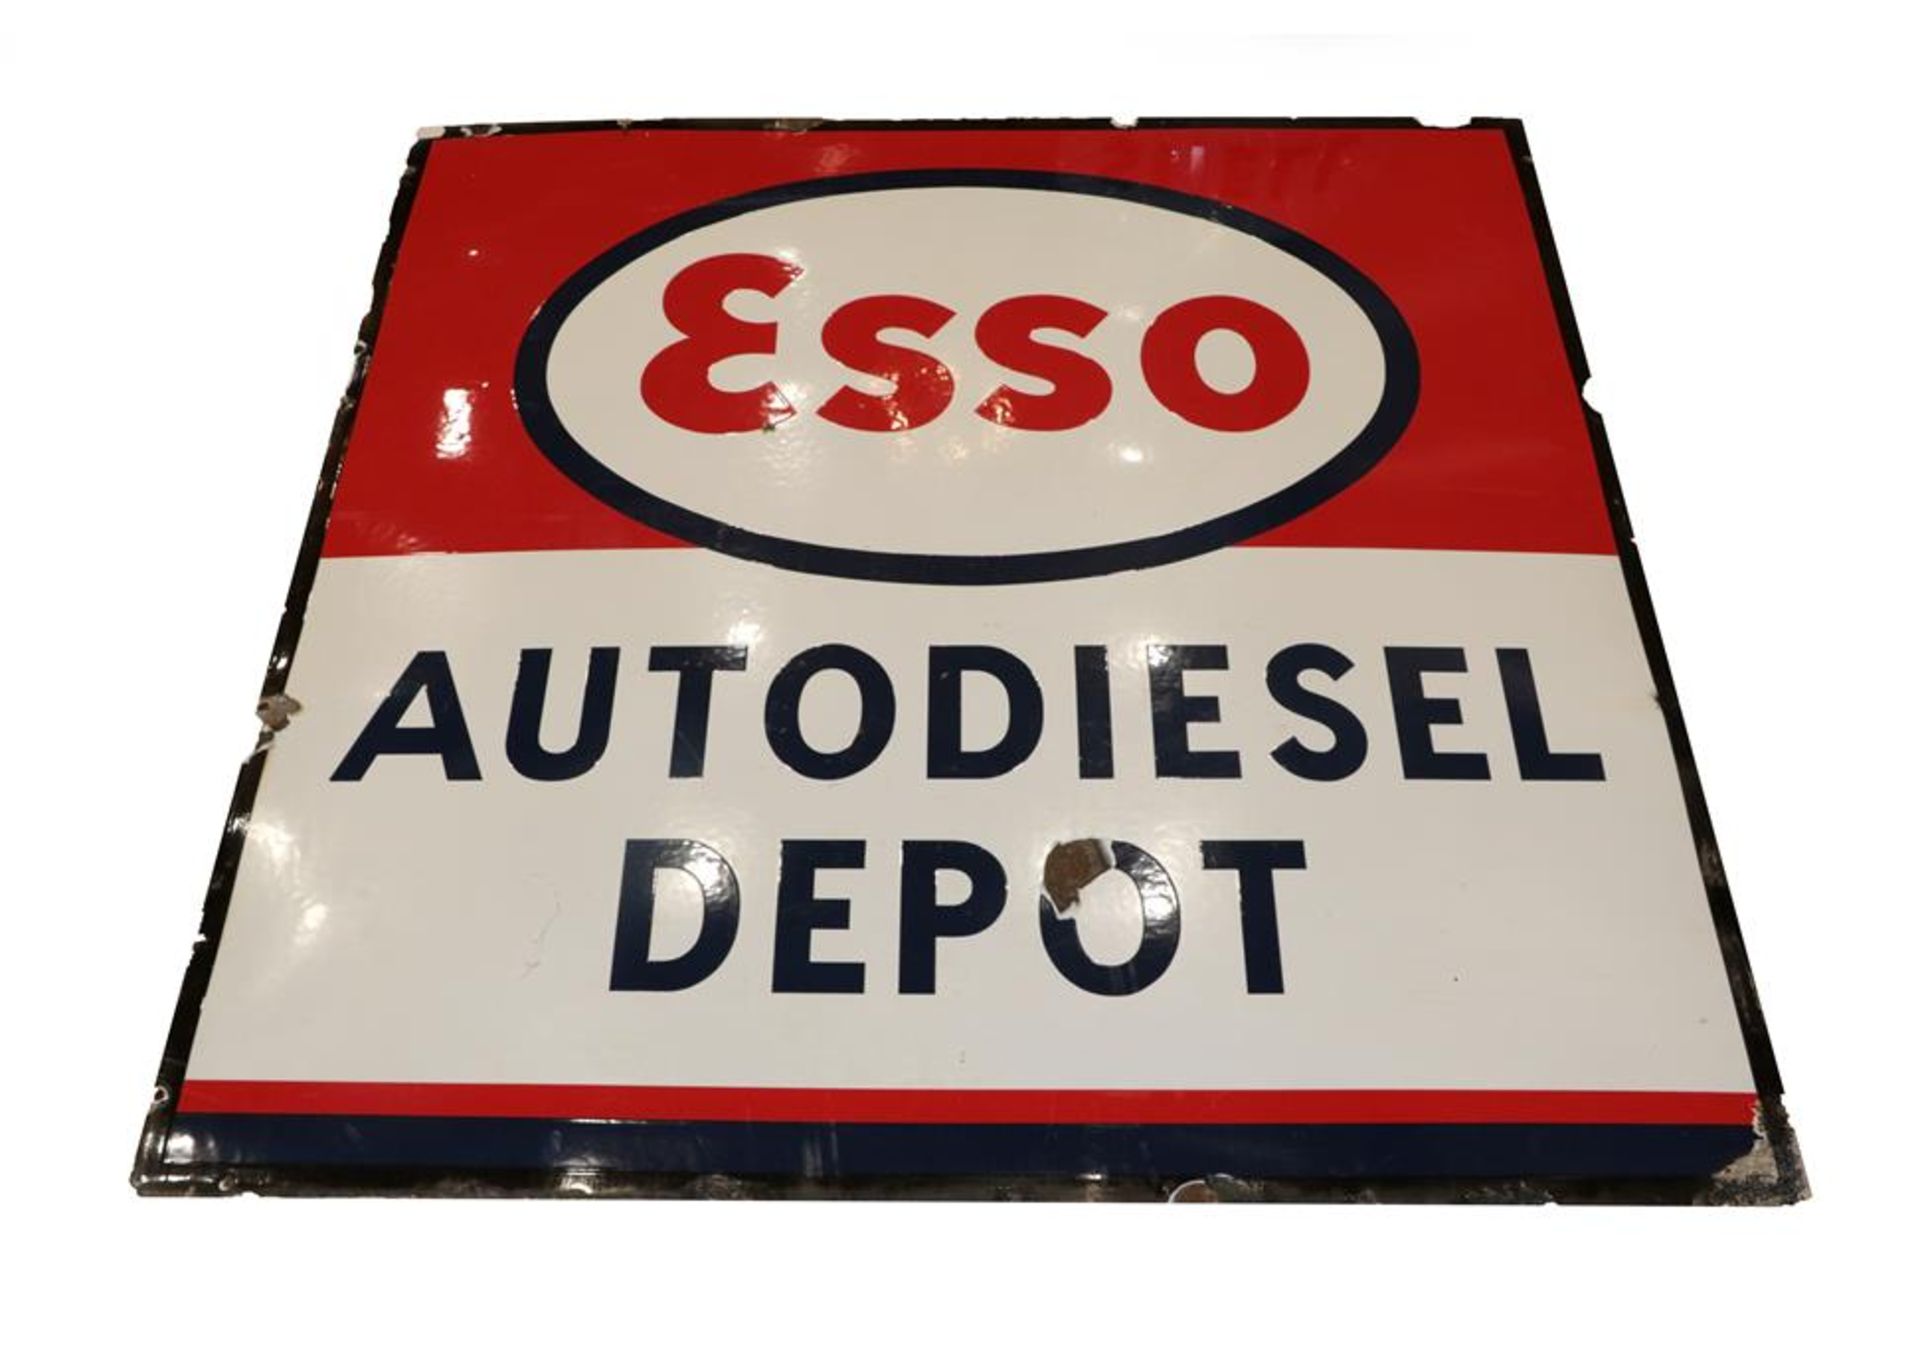 Esso Auto Diesel Depot: A Single-Sided Enamel Advertising Sign, 122cm by 122cm